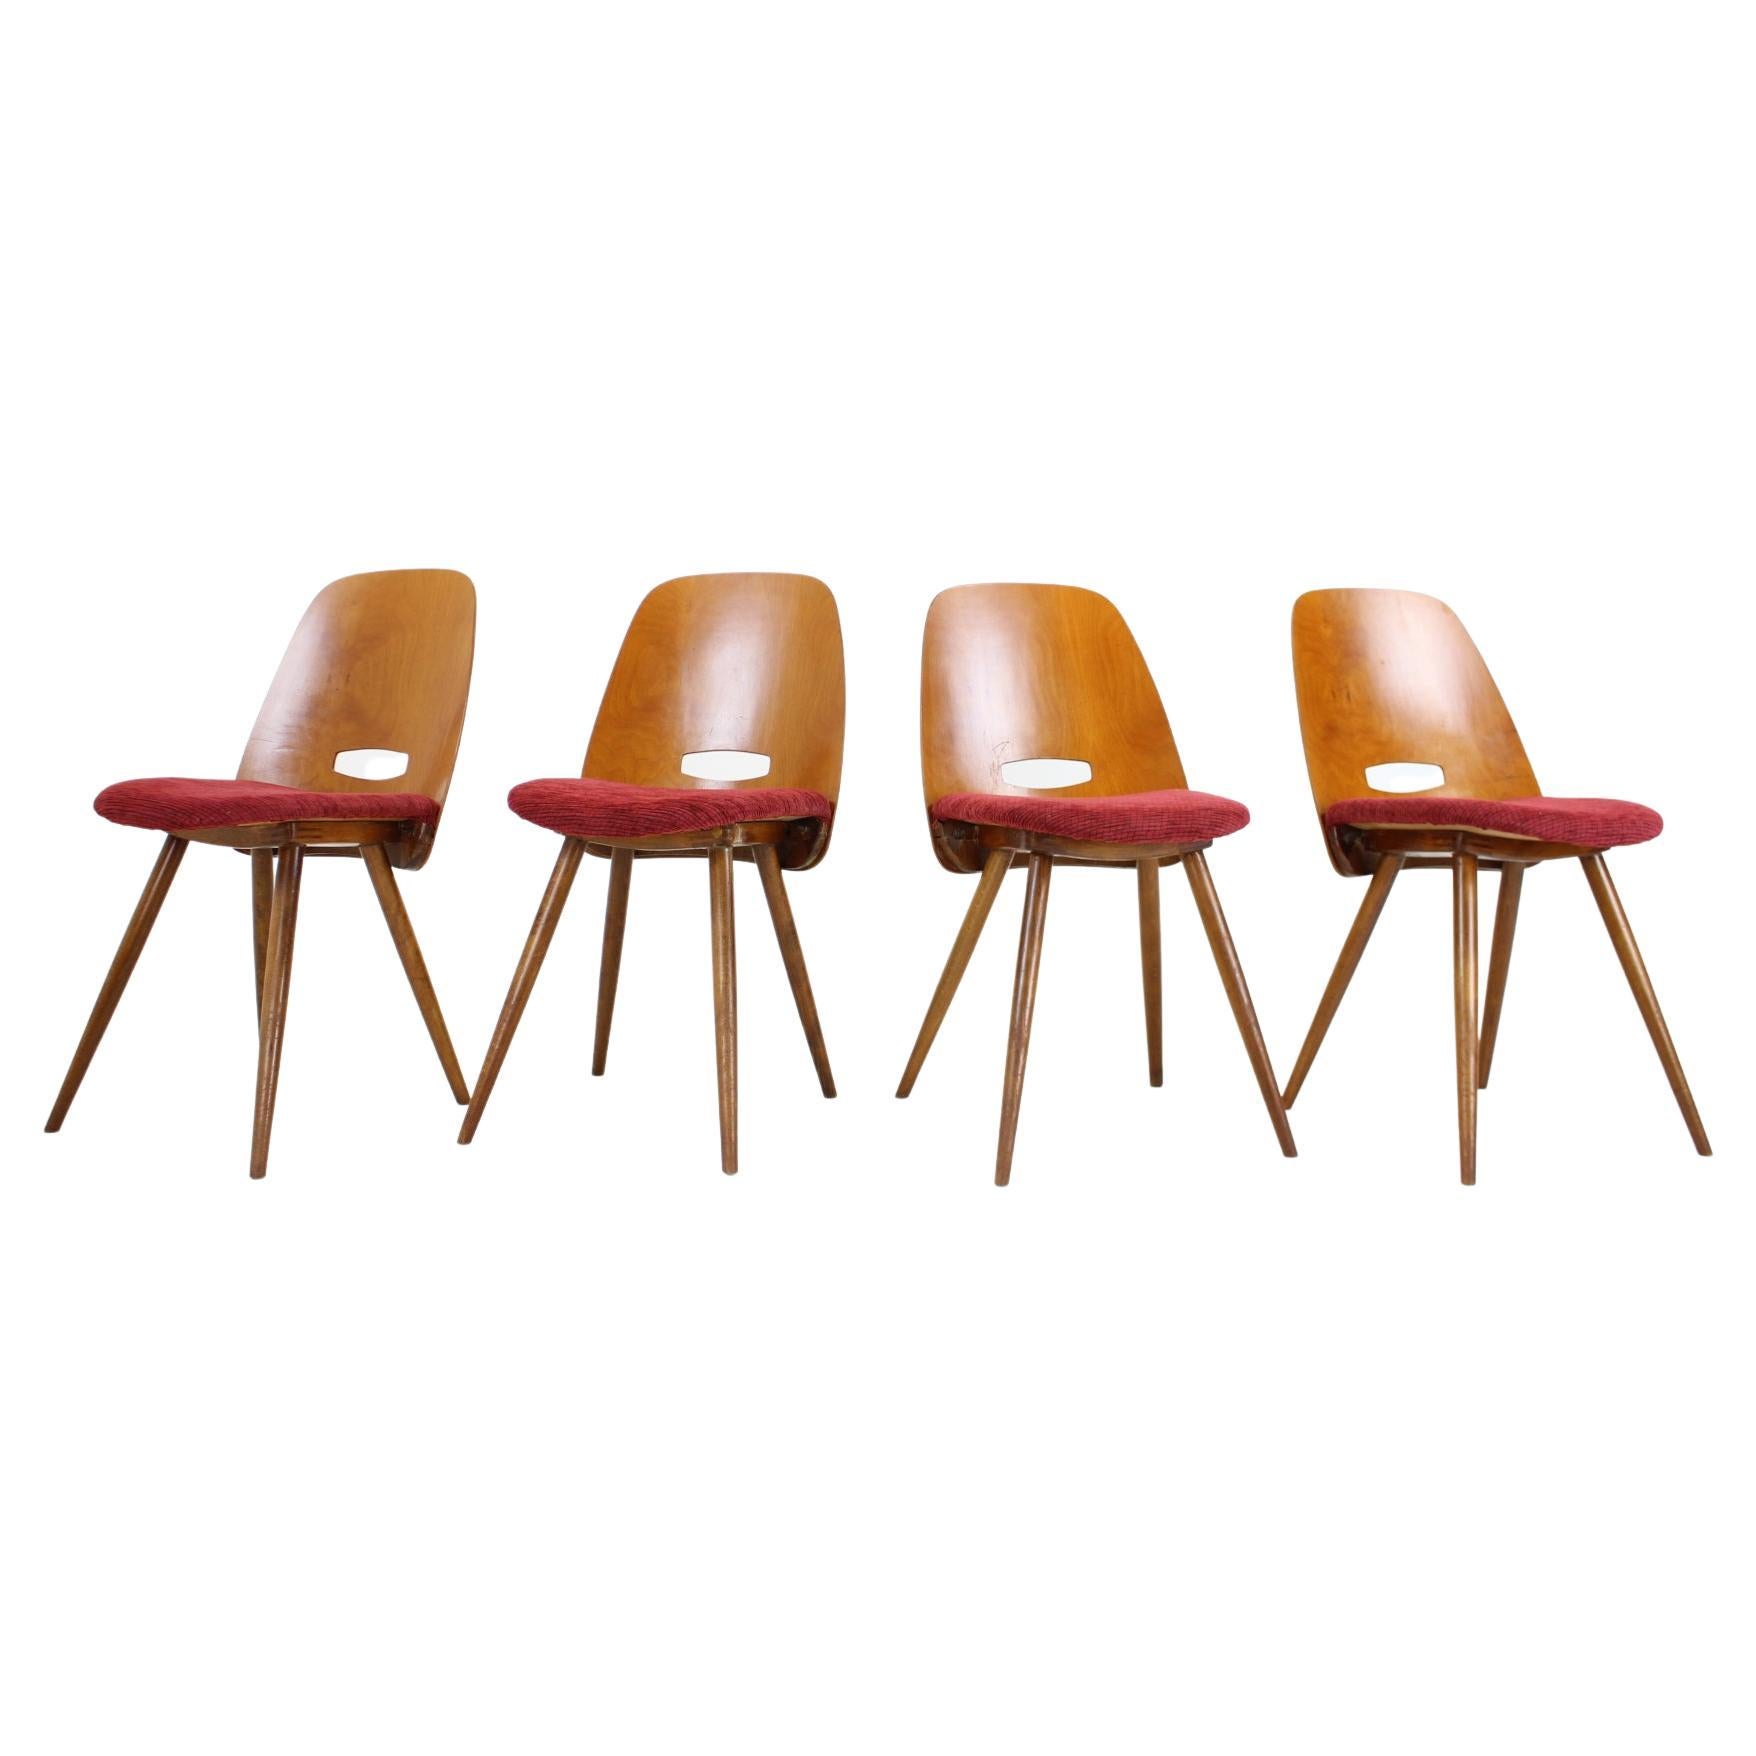 1960s Dining Chairs by Frantisek Jirak for Tatra, Set of 4 For Sale